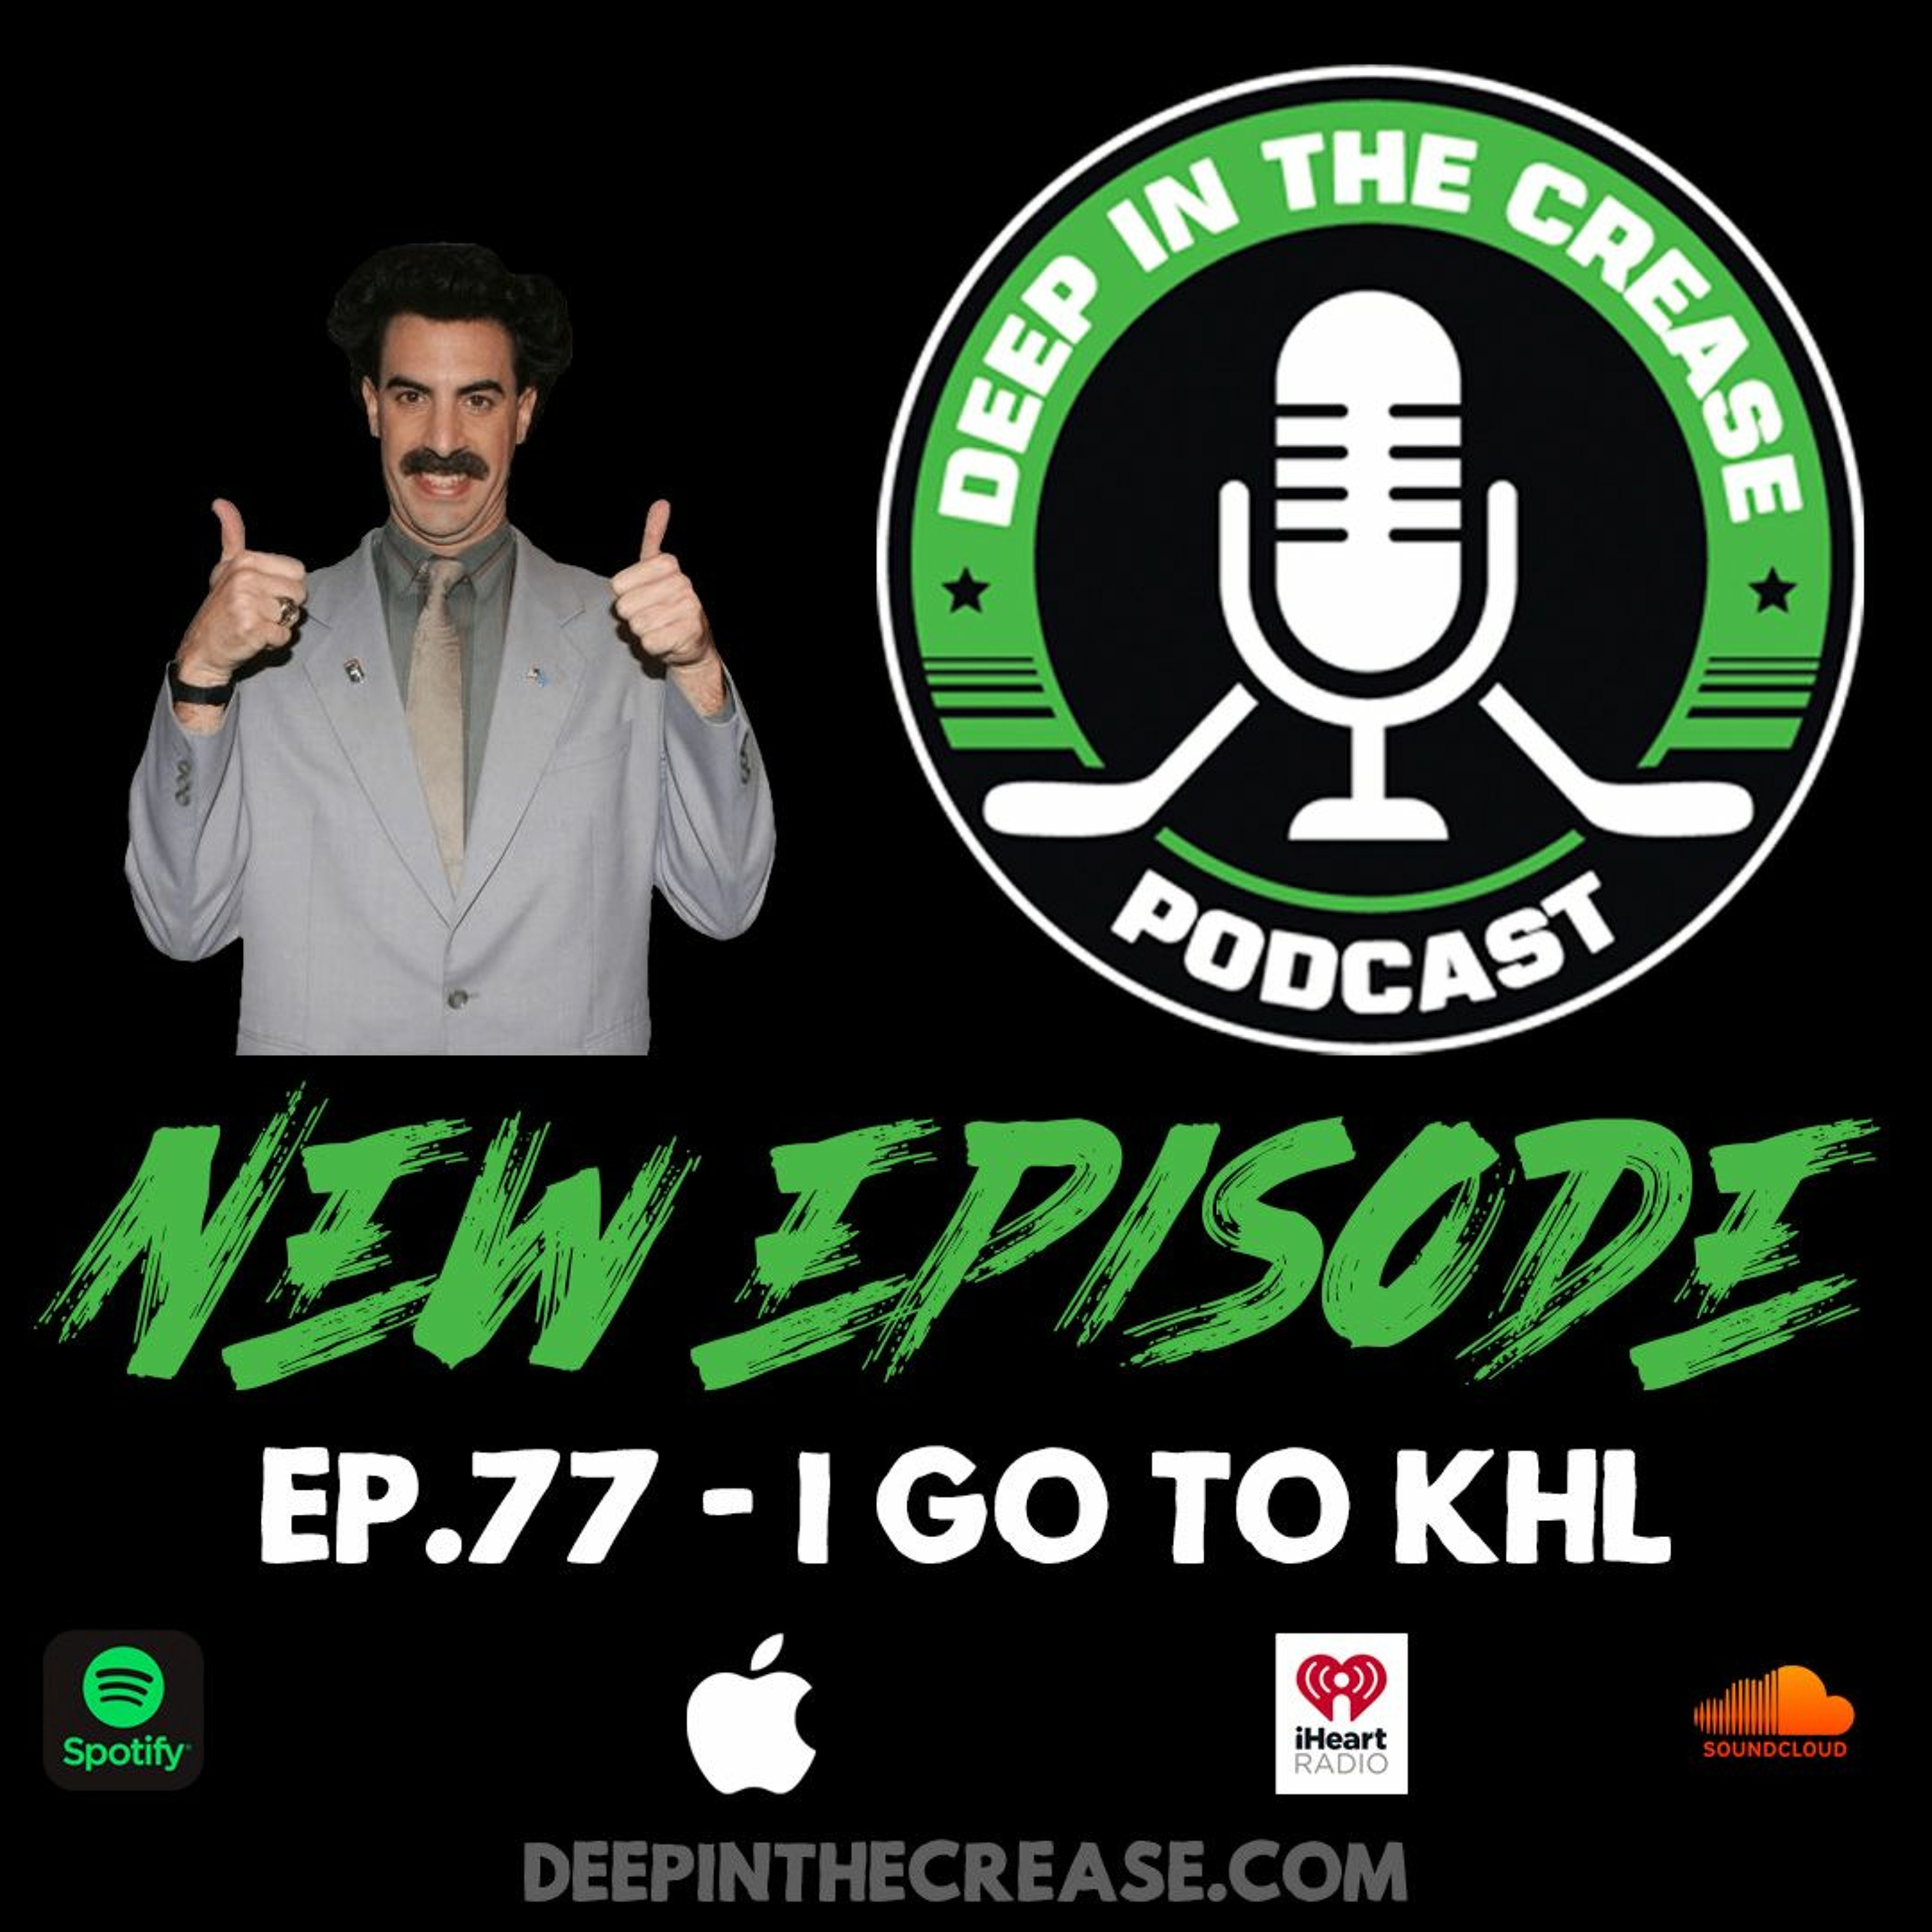 Episode 77 - I Go To KHL